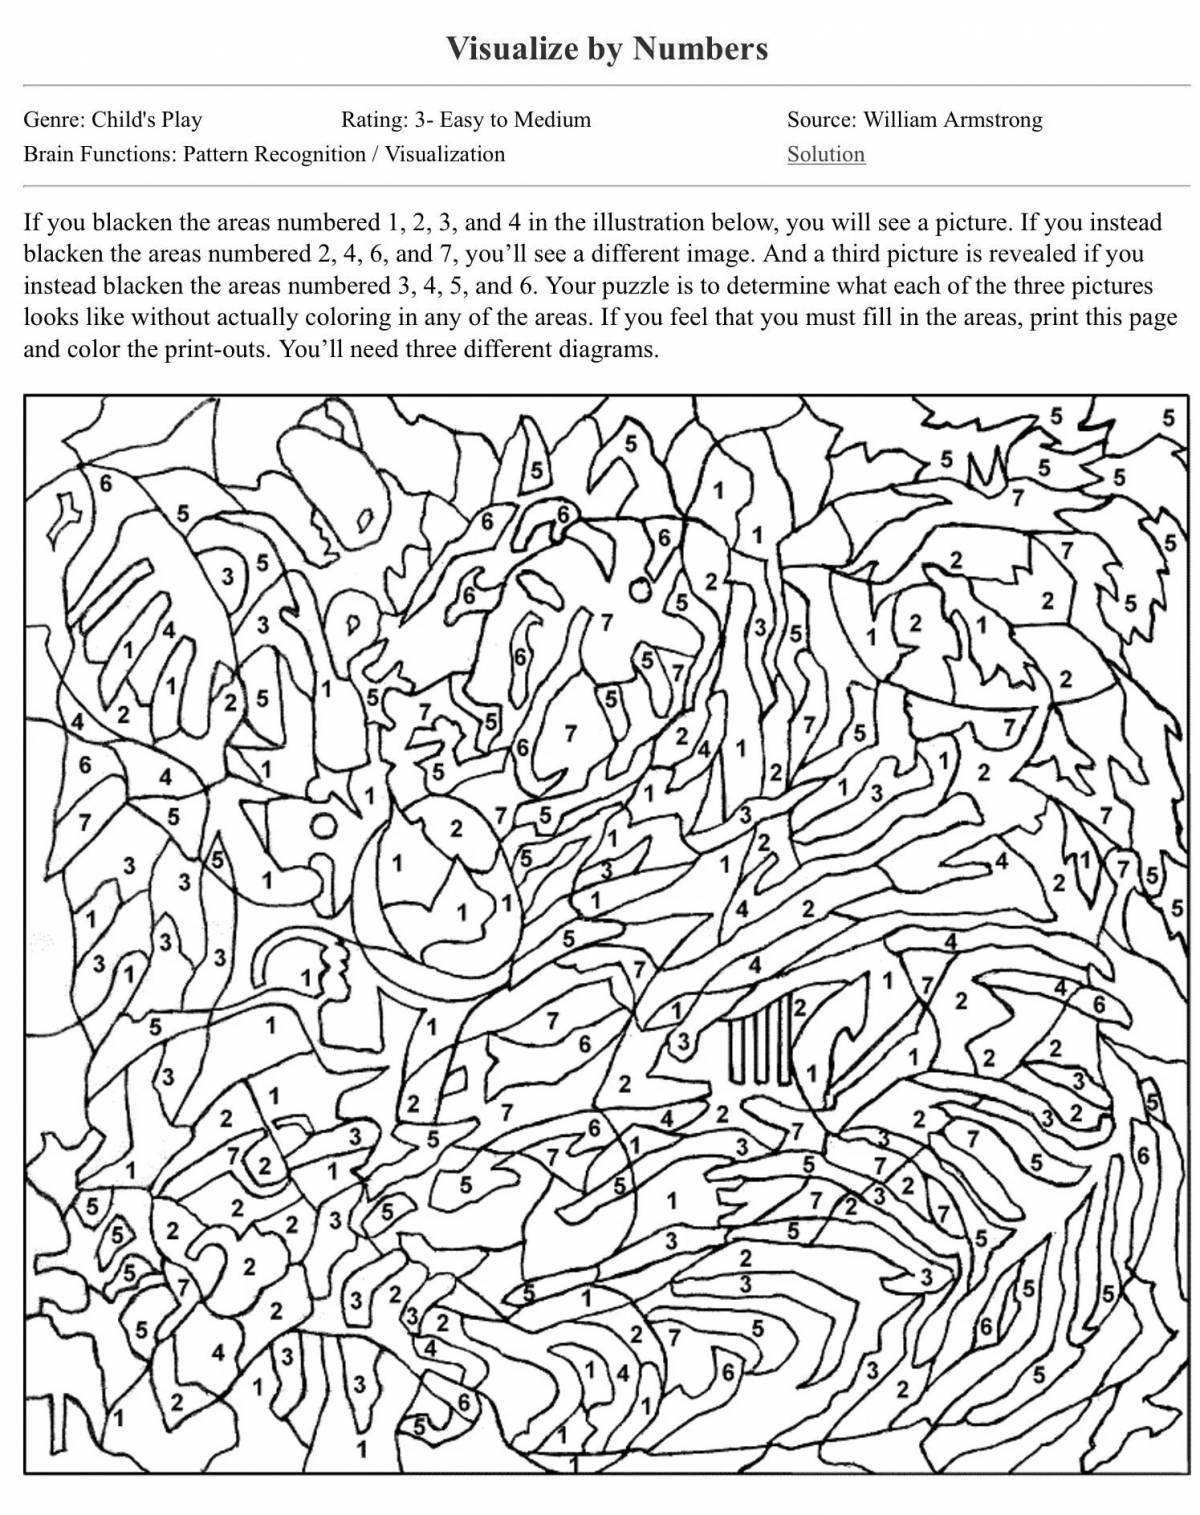 Fun coloring pages for adults